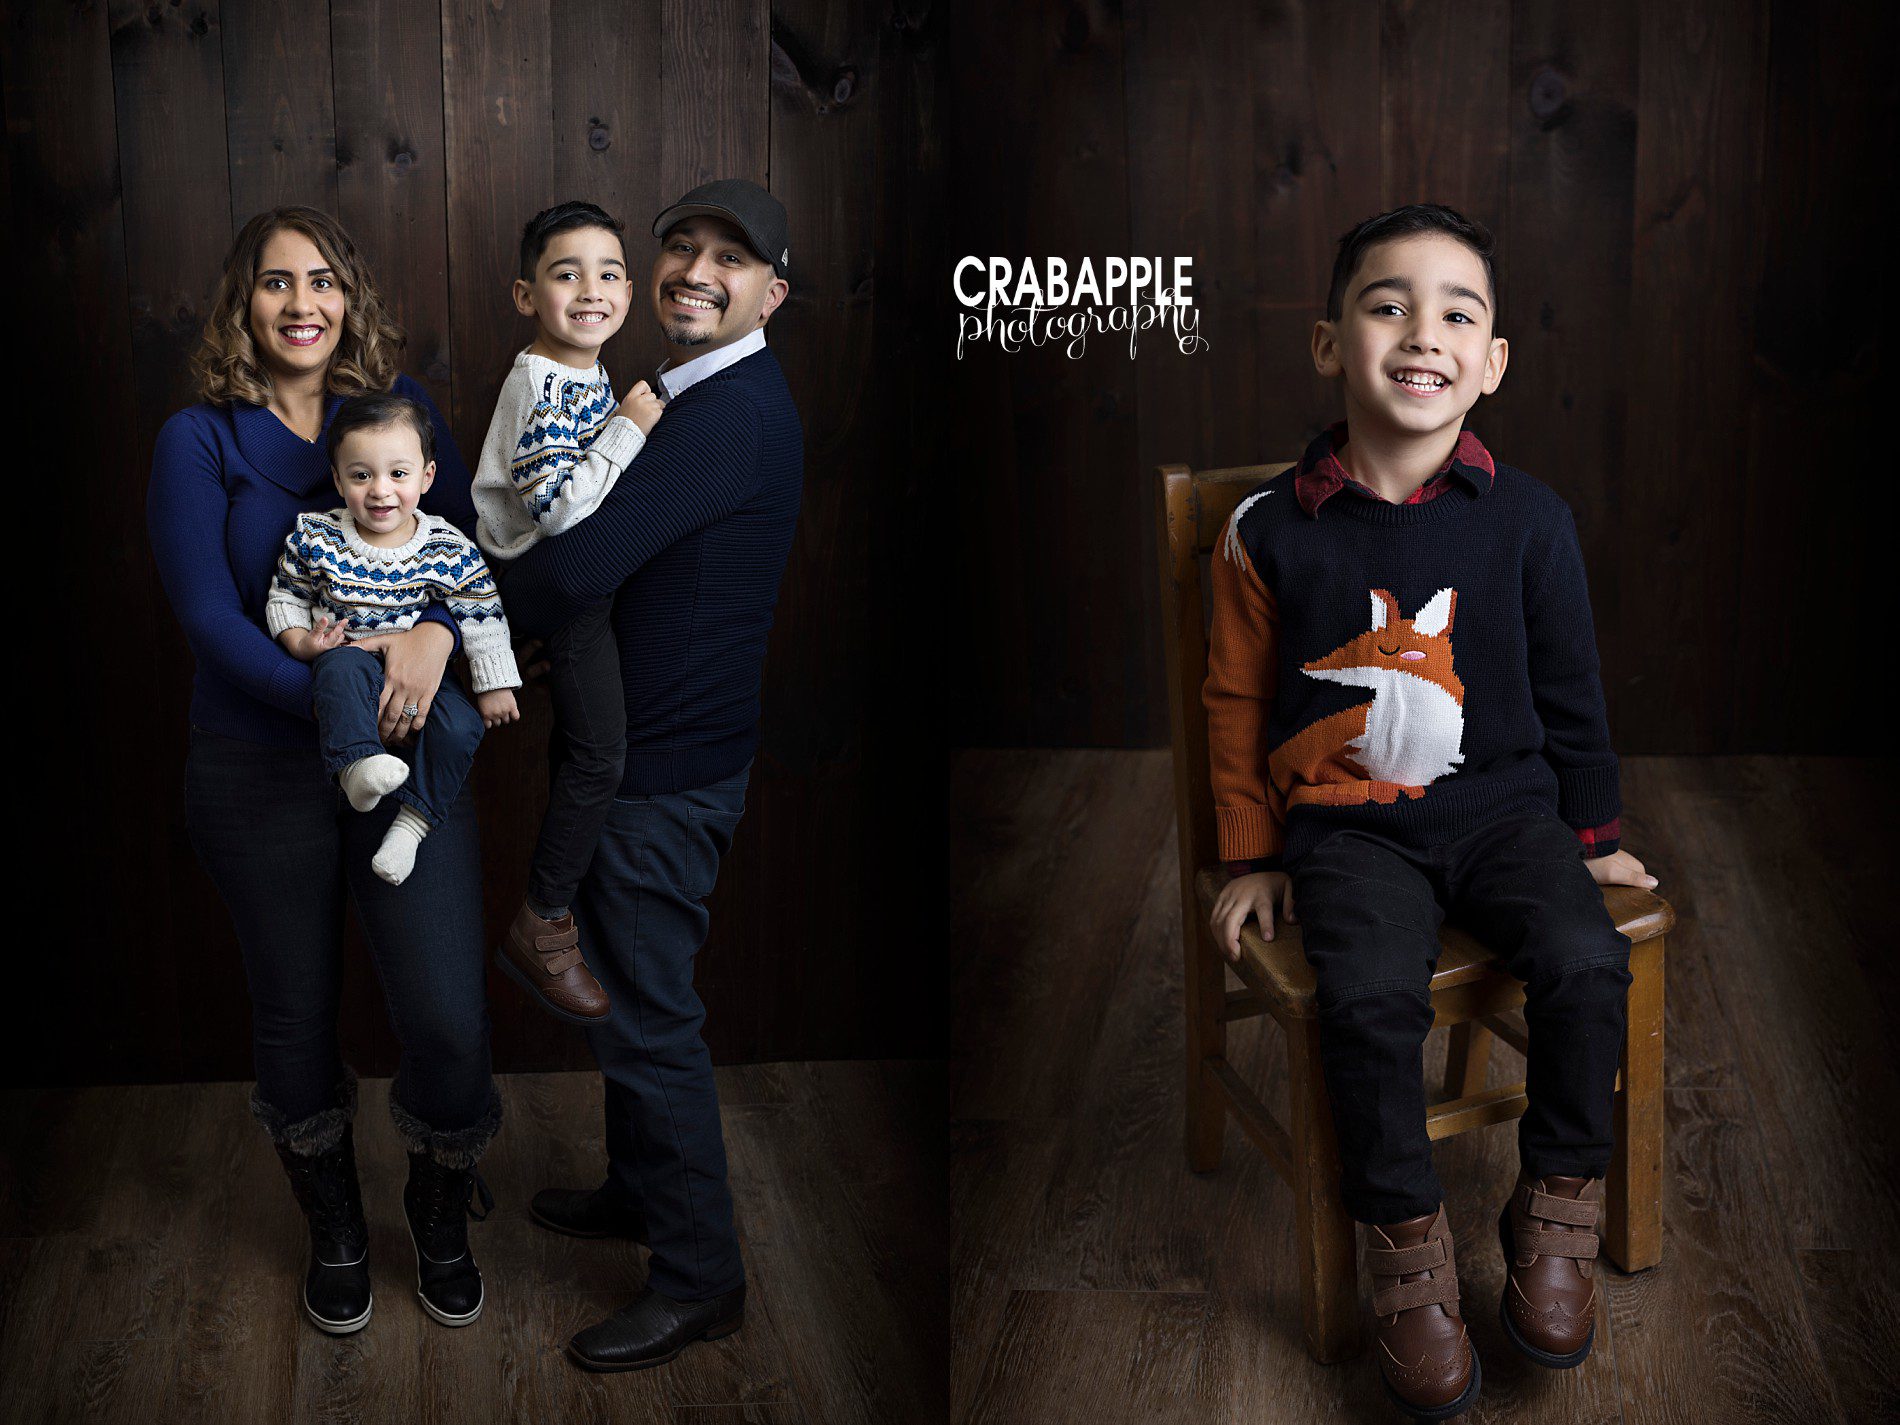 Fun sweaters for child and family photos